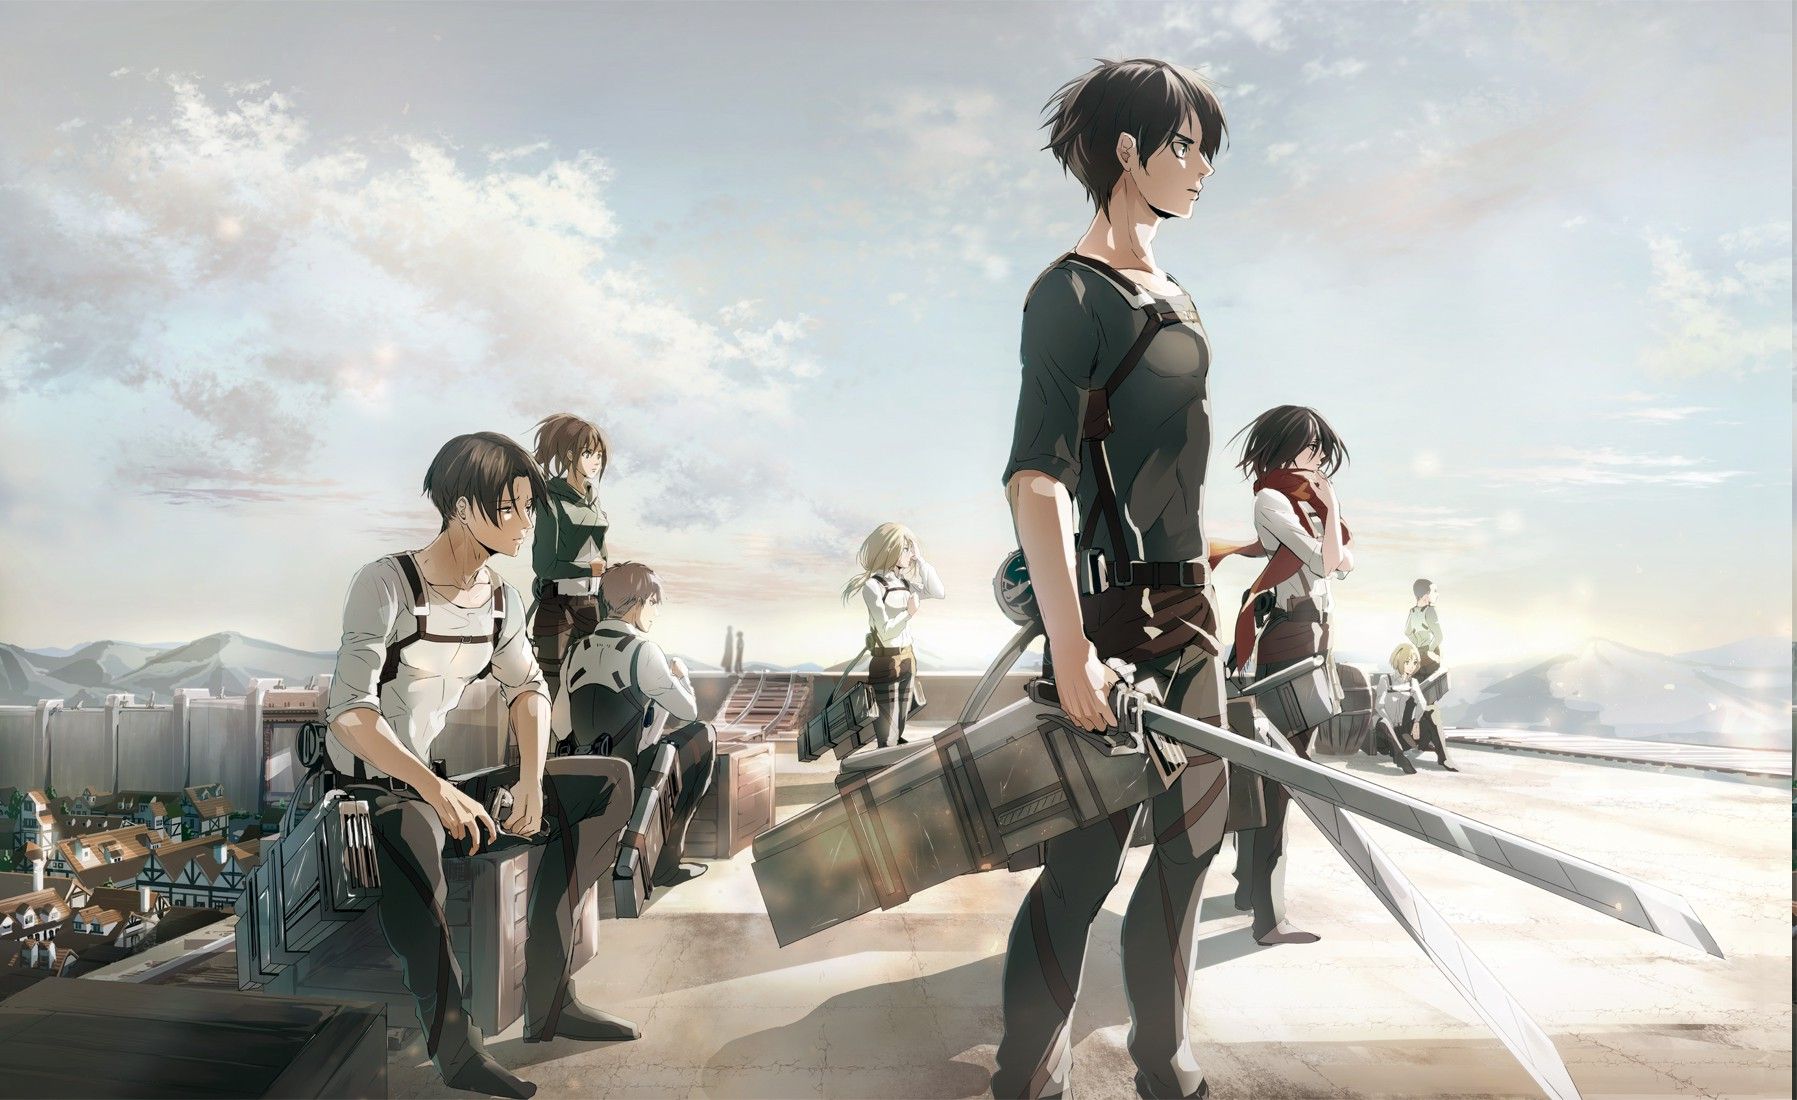 337 Wallpaper Hd Pc Attack On Titan Images & Pictures - MyWeb